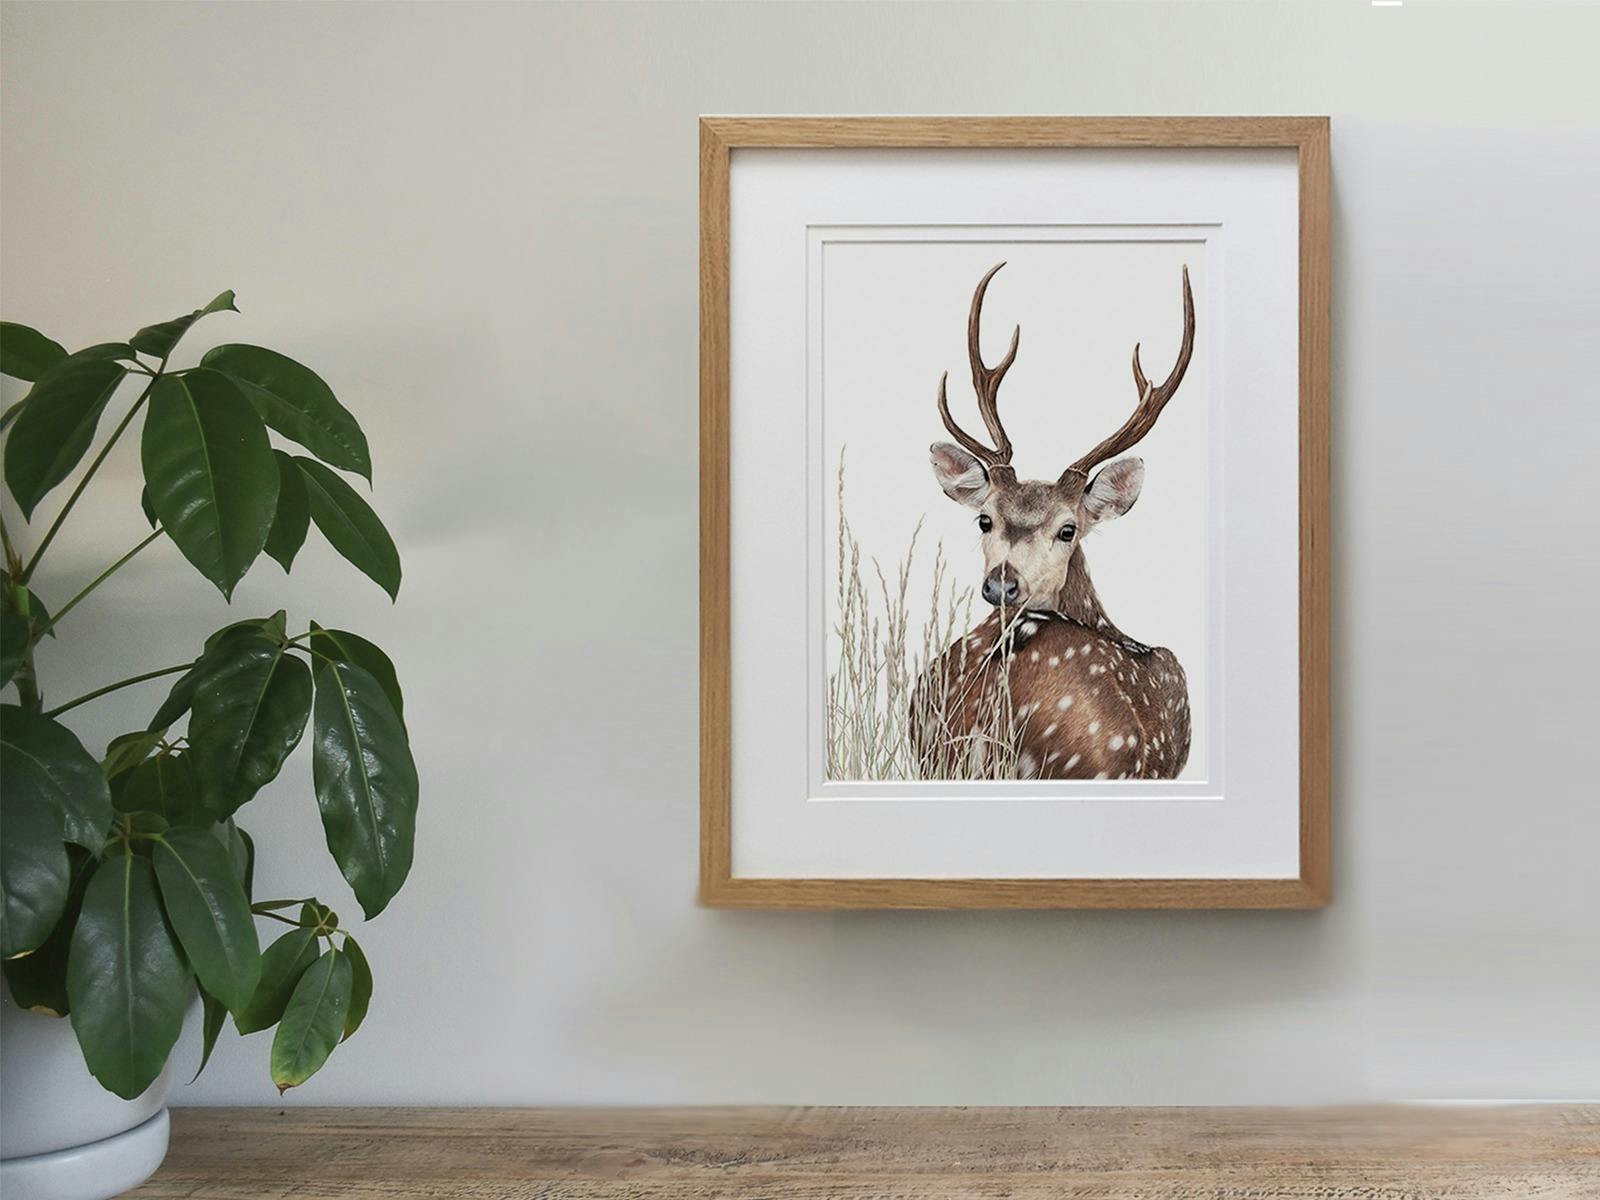 Framed artwork of a chital stag on the wall, above a wooden table with a potted plant